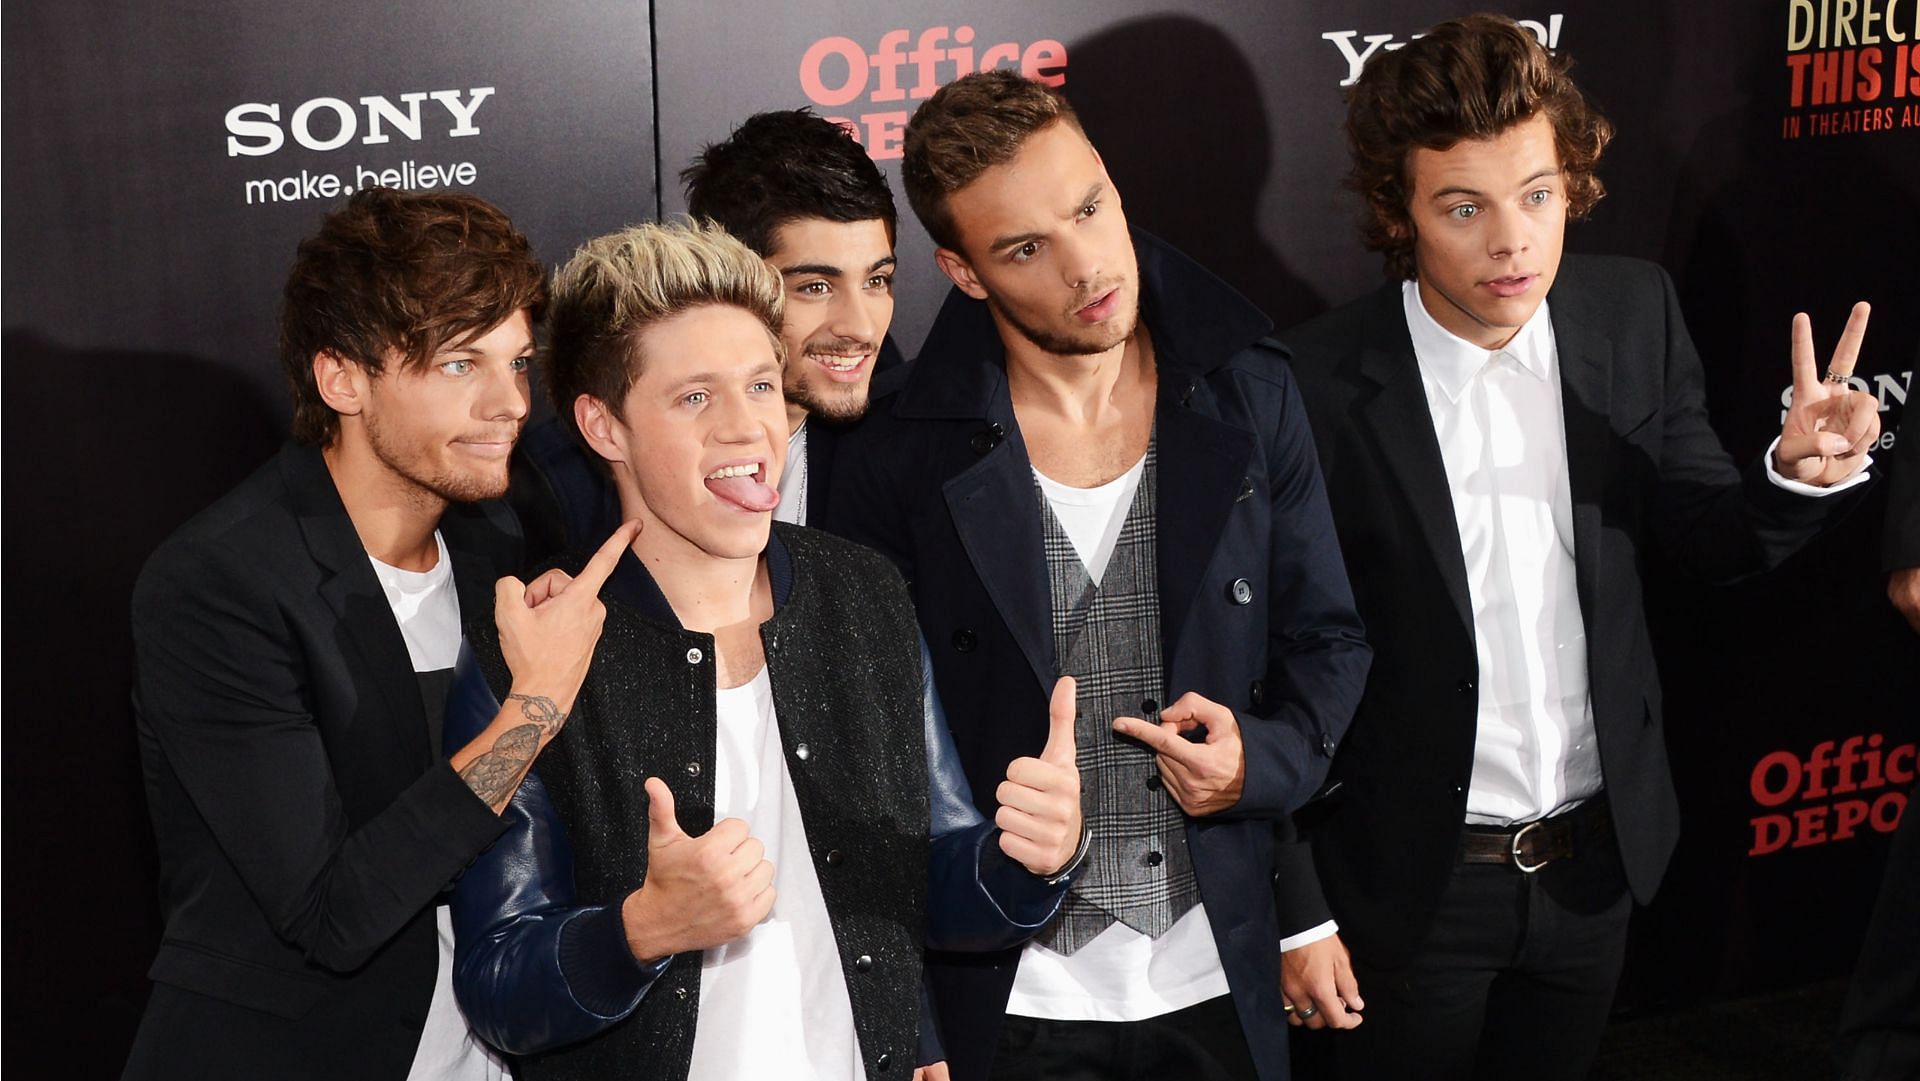 One Direction went on an extended hiatus in 2015. (Image via Larry Busacca/Getty)